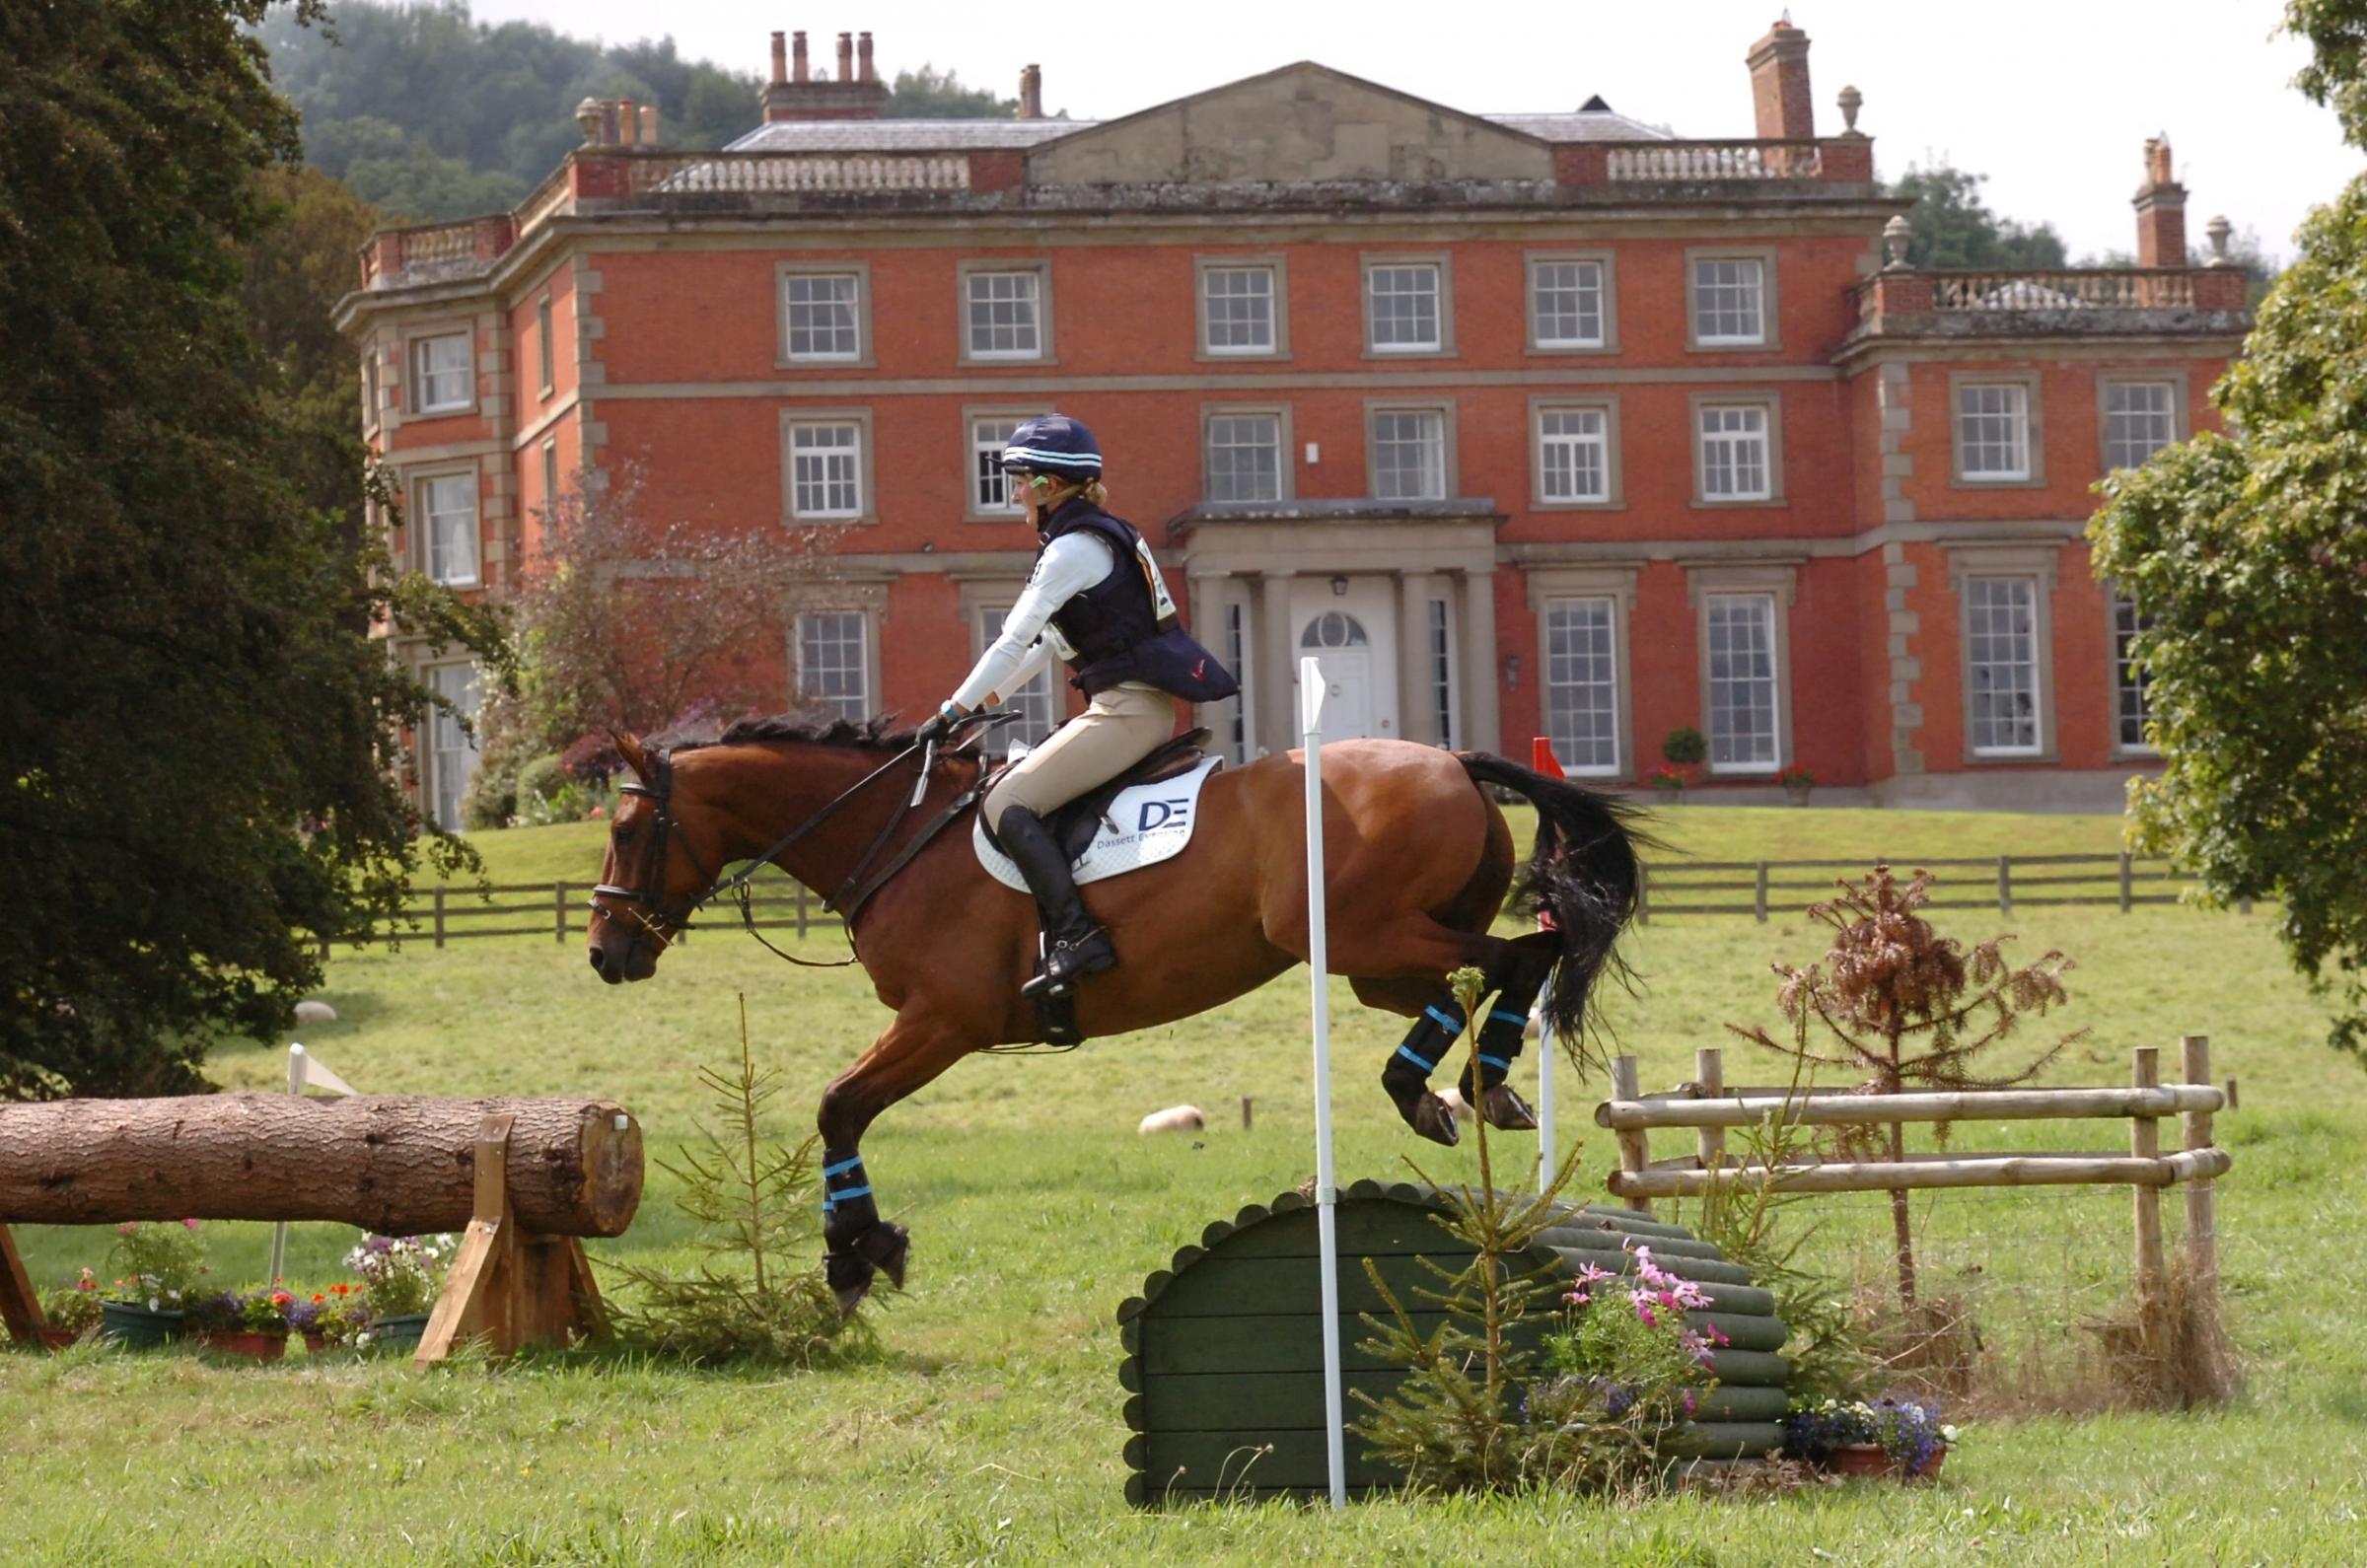 Male House Horse Trials - Rosie Thomas on Acrobat III jumps the Logpile fence on the cross country course.  1432_5006